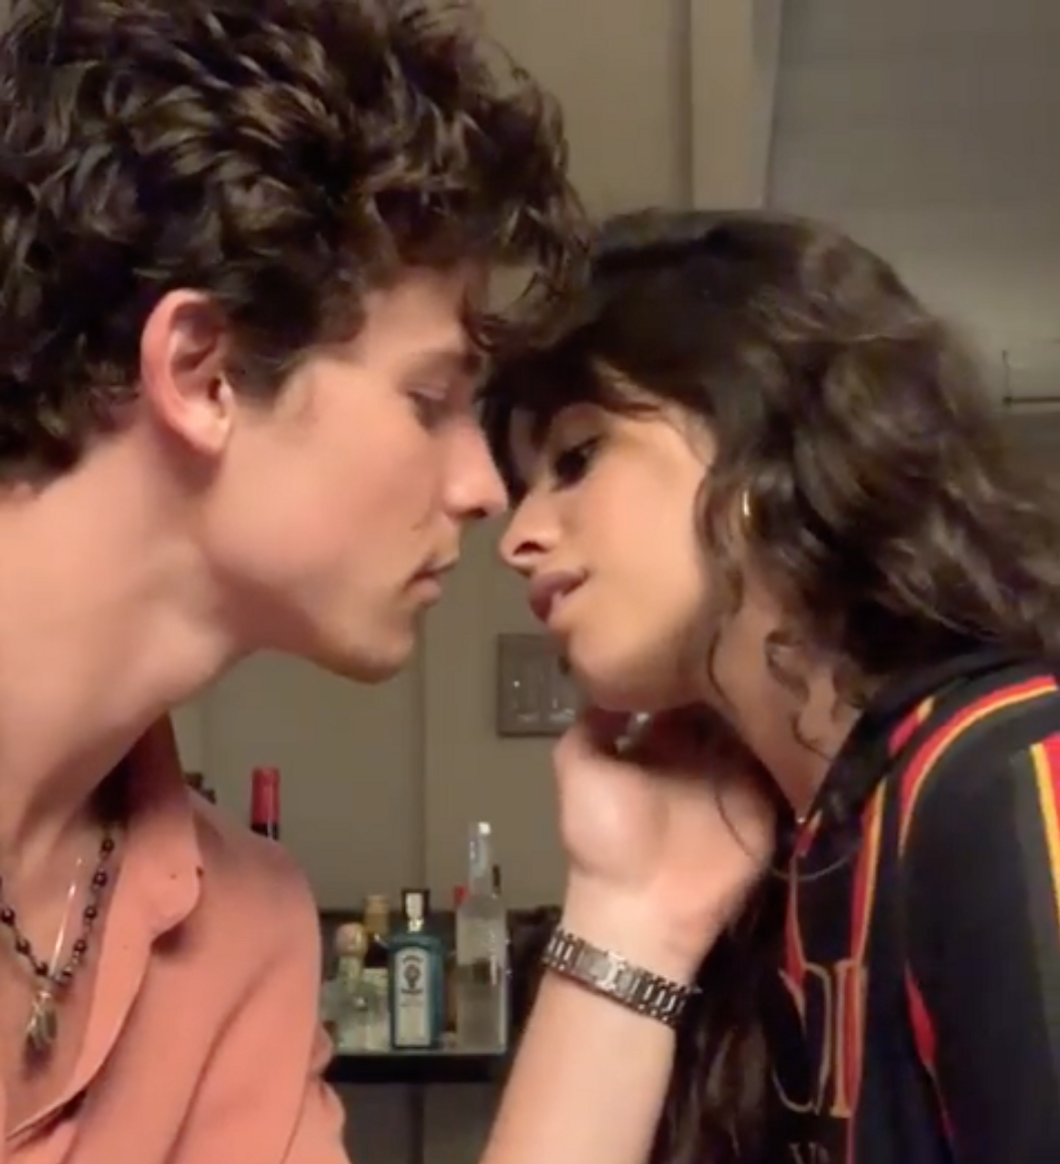 20 Things I Would Rather Do Than Watch That Disturbing Video Of Camila Cabello And Shawn Mendes Making Out